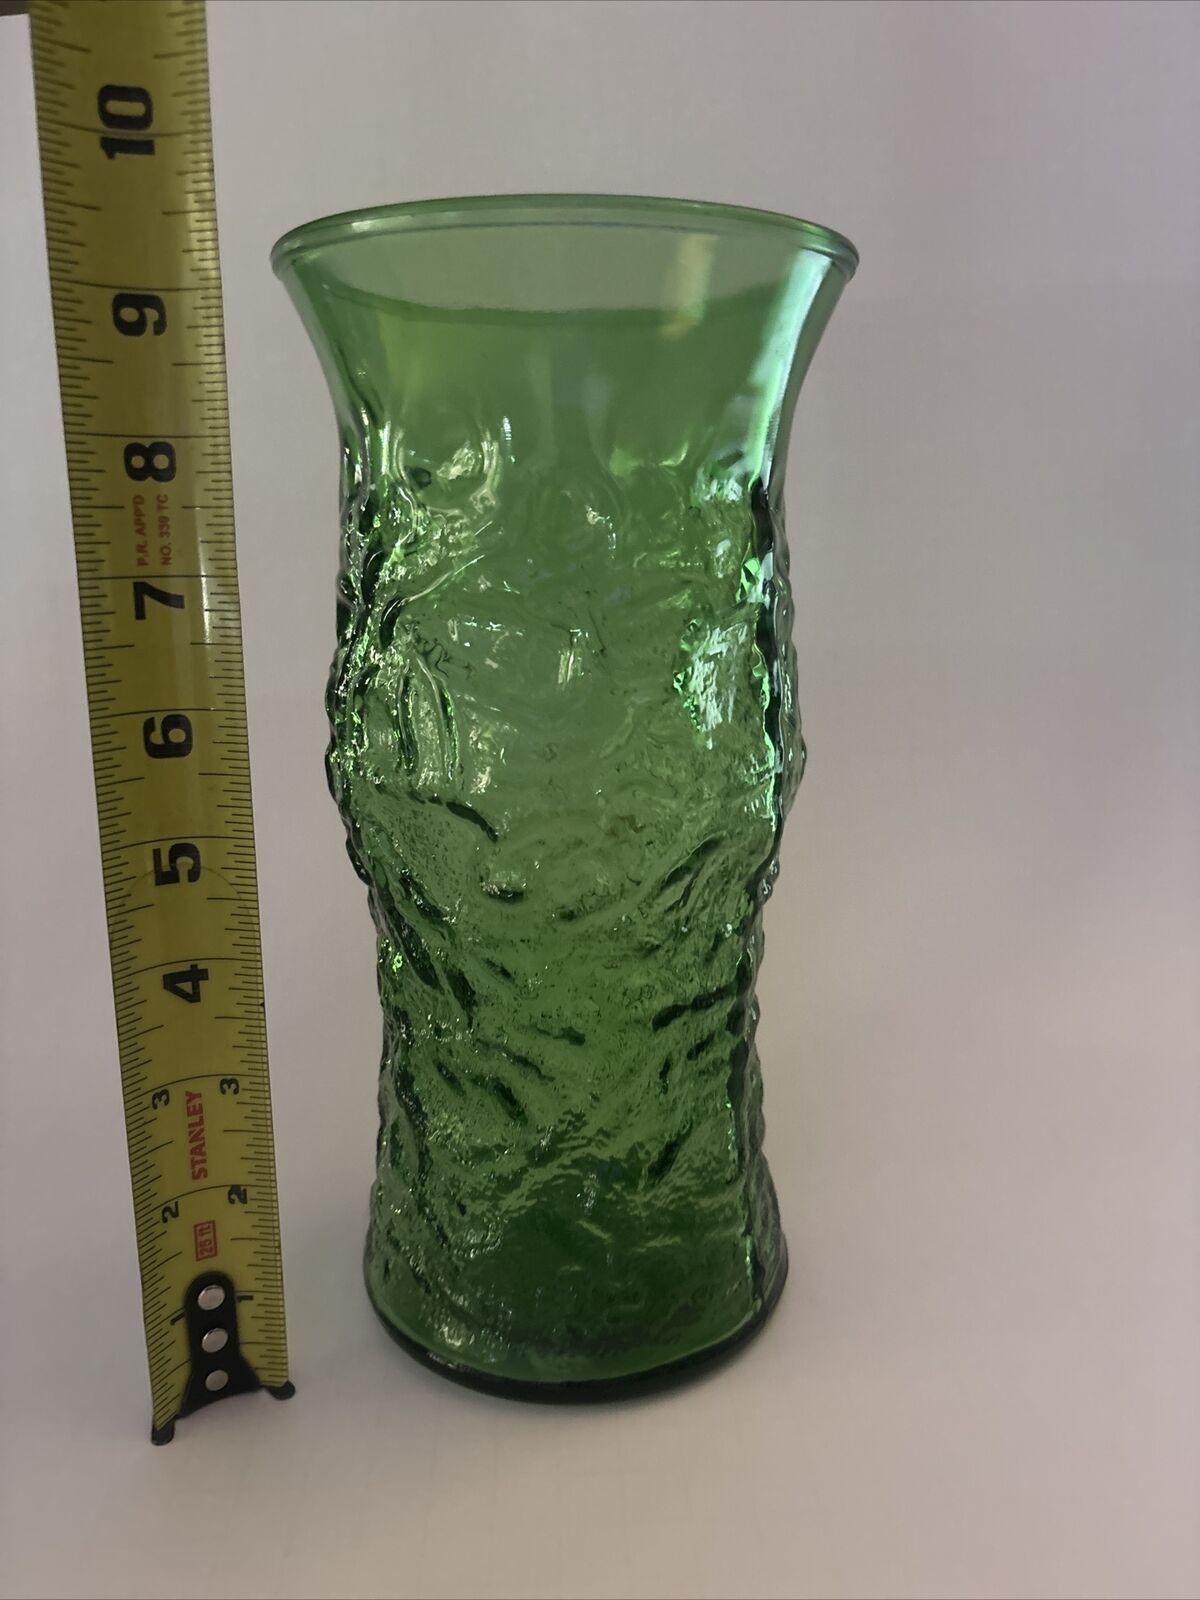 VNT Green E.O Brody Co. Cleveland USA Crinkle Textured Glass Vase 9.5” MCM G106